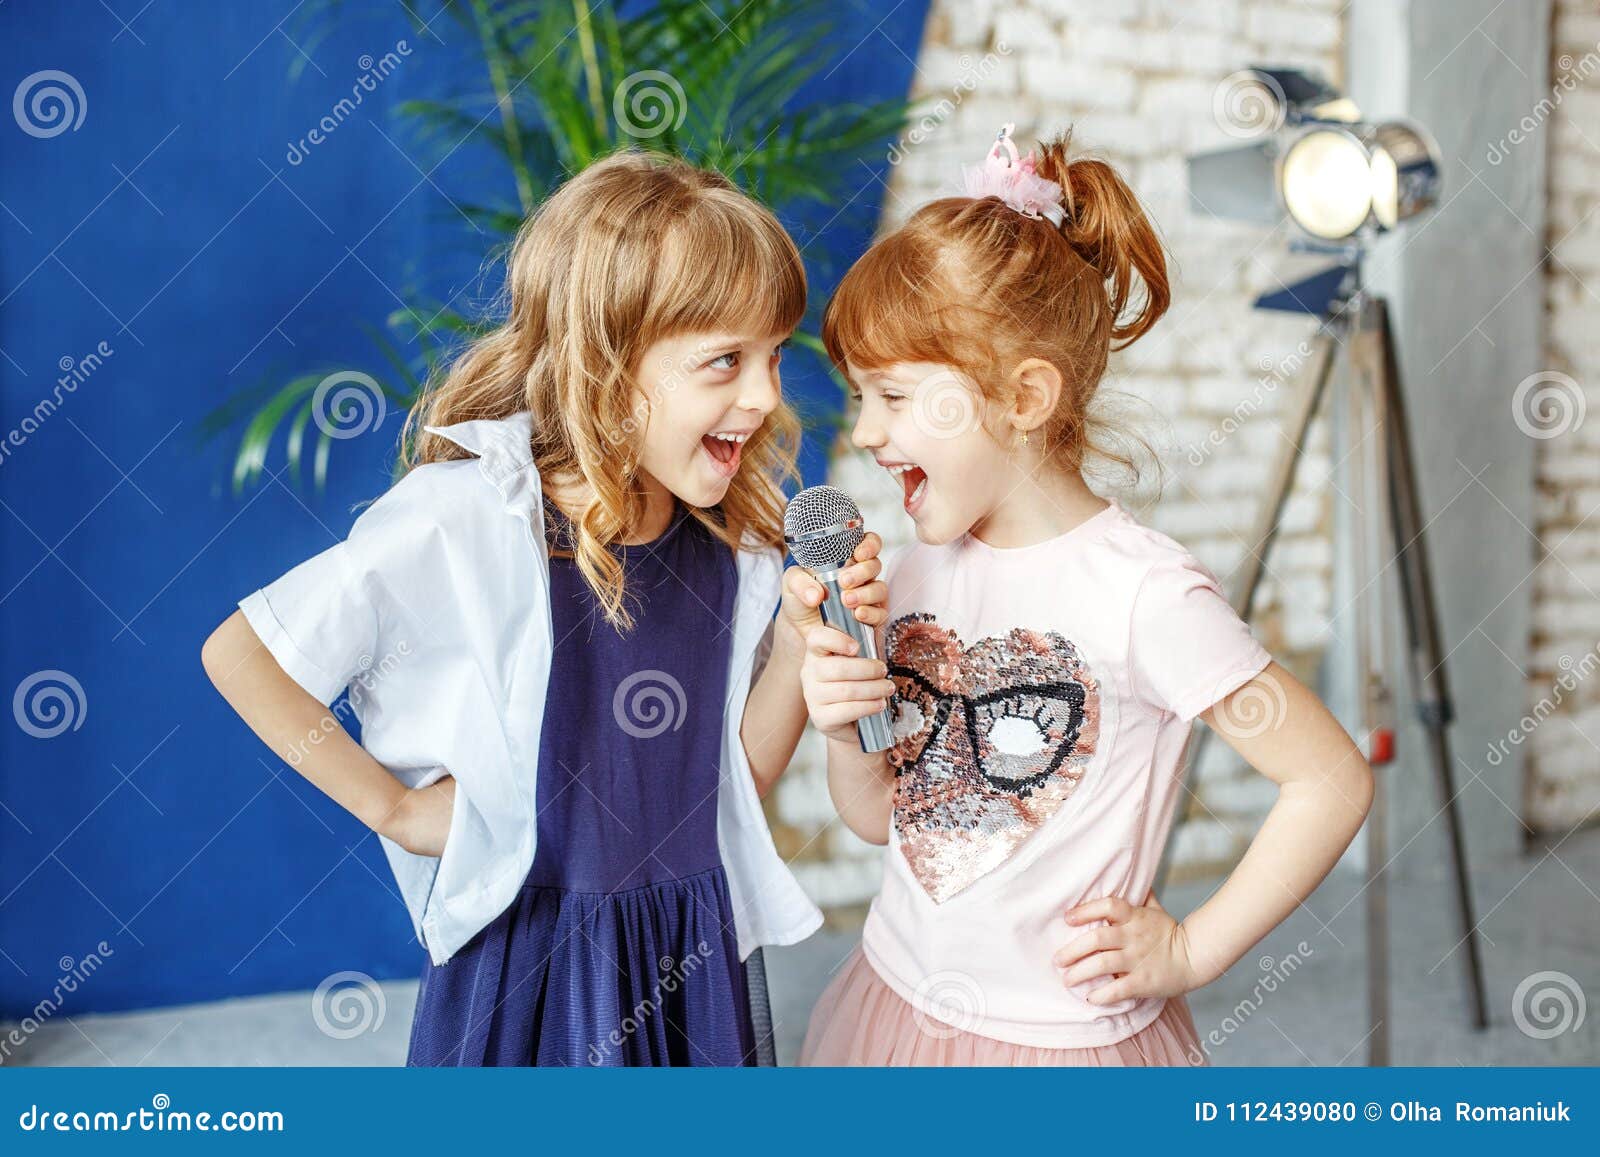 two happy little children sing a song in karaoke. the concept is